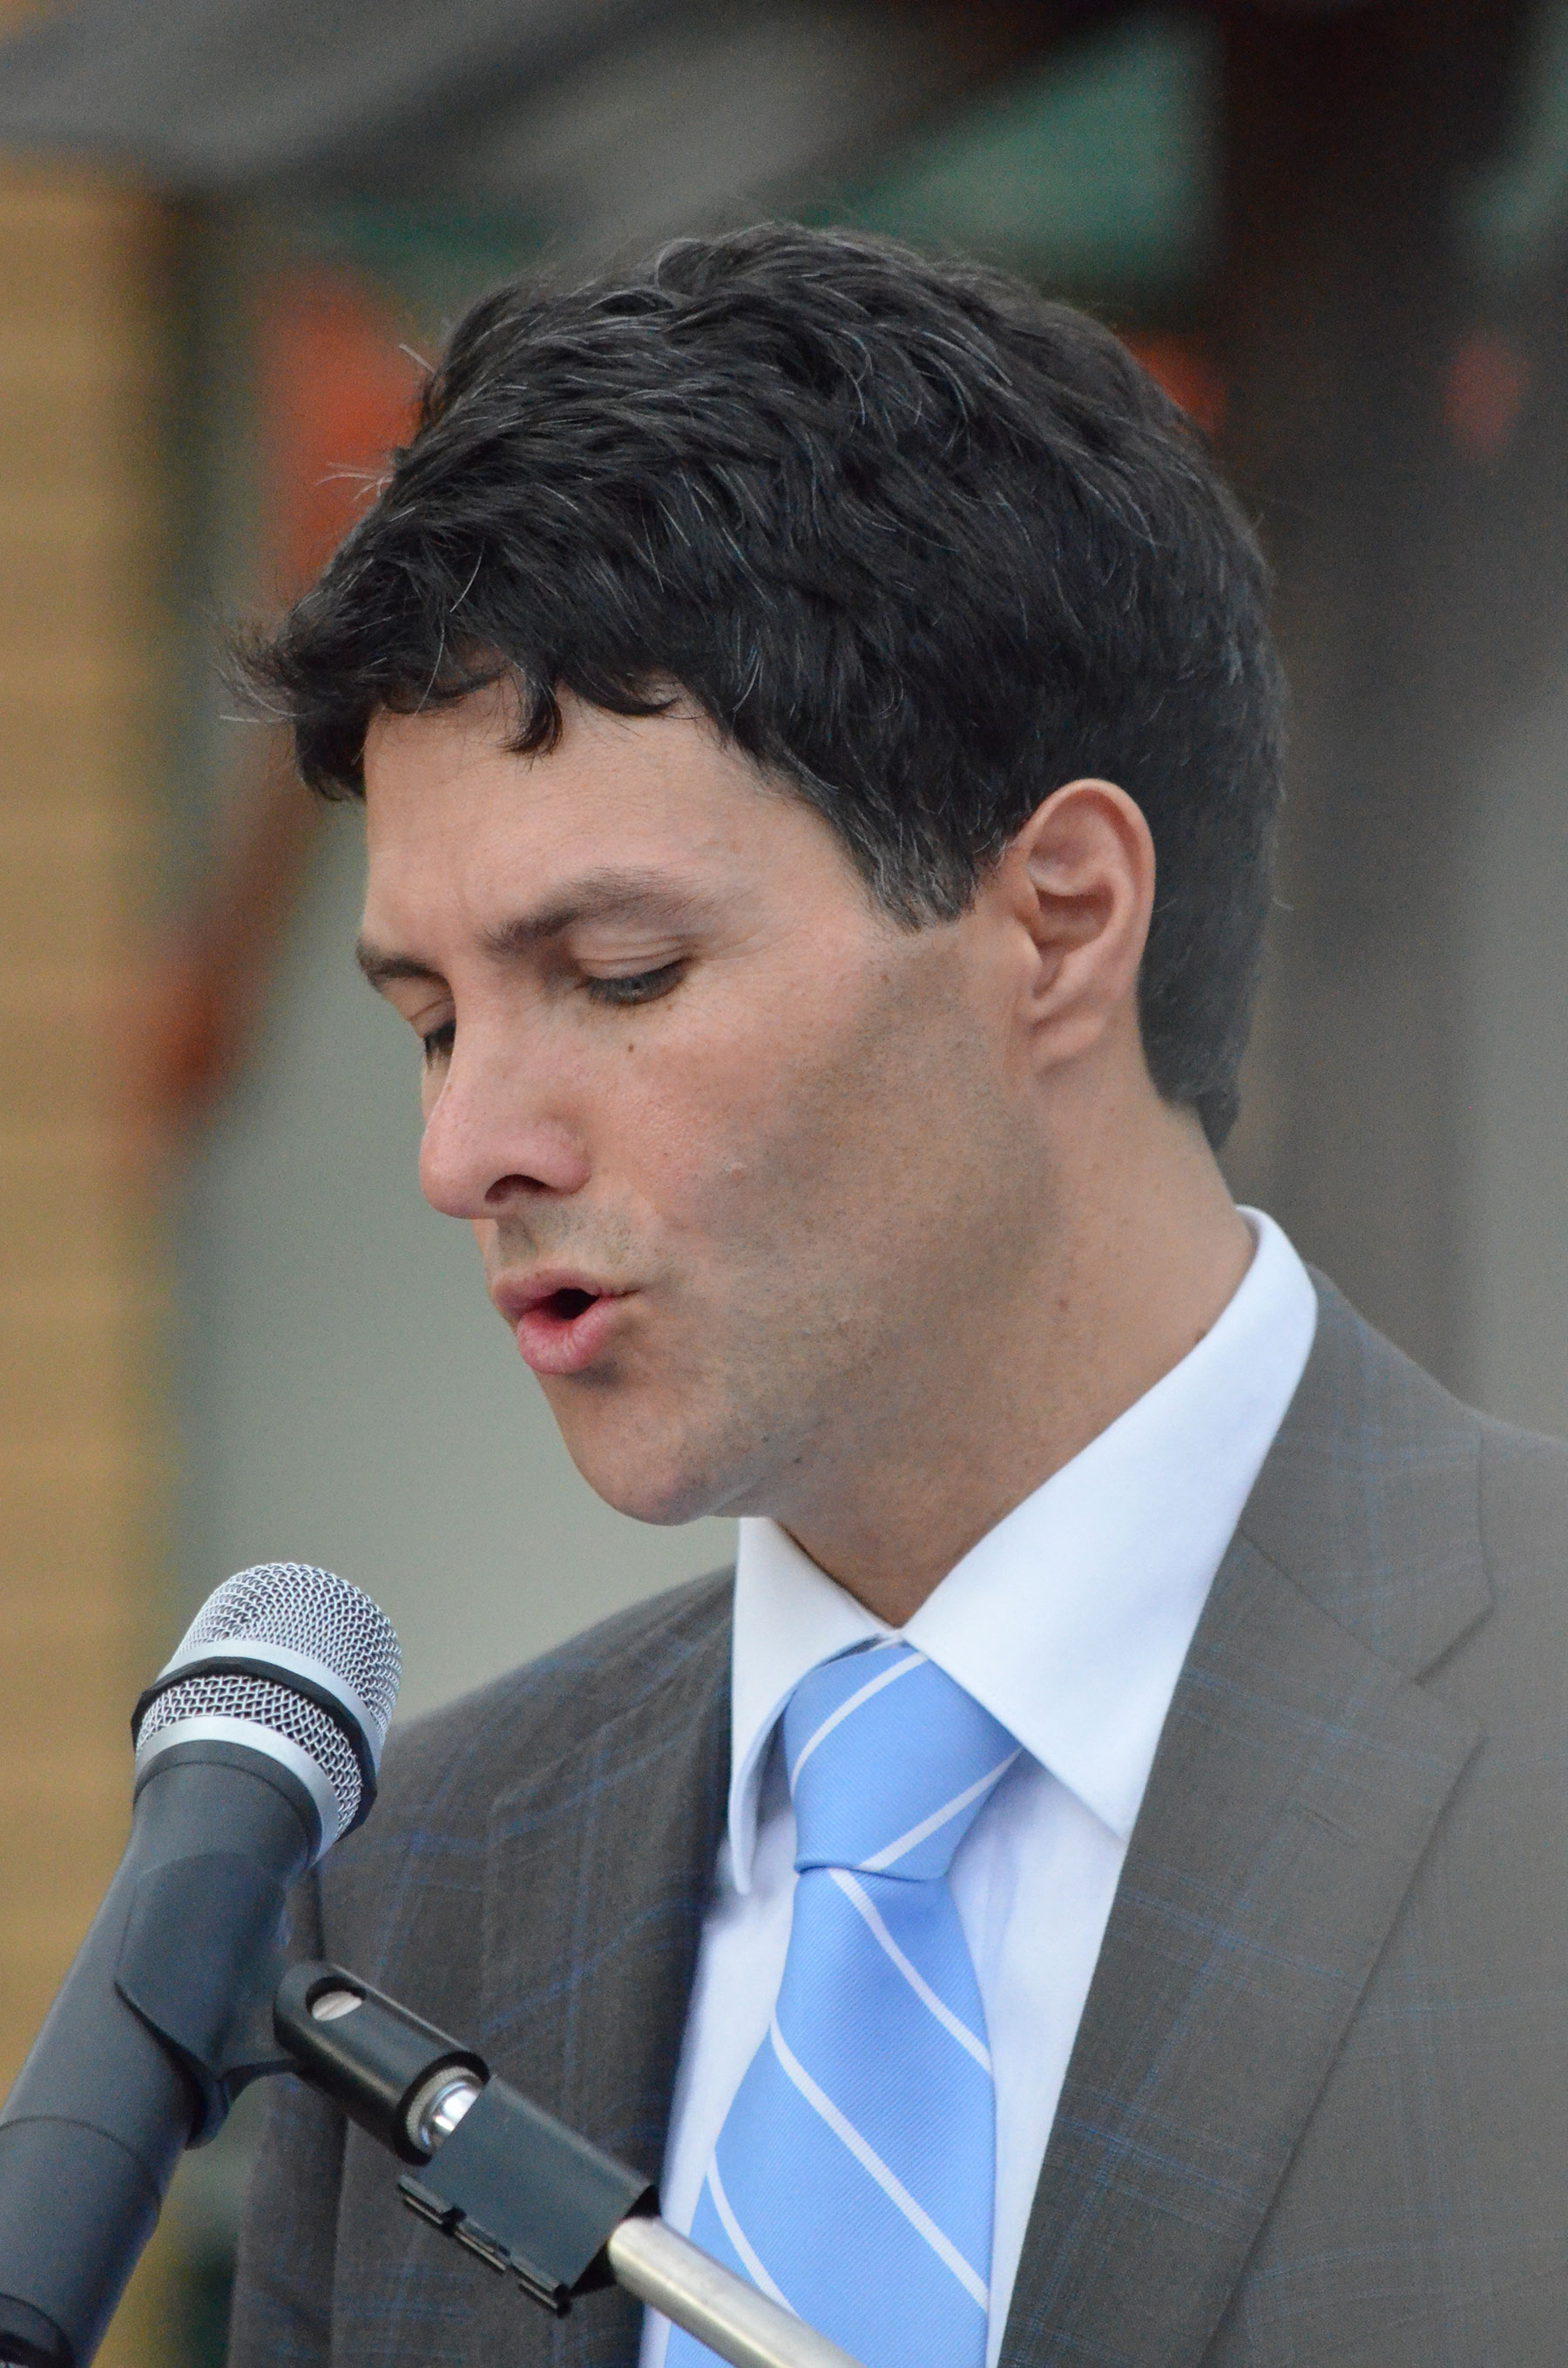 03 Victor Dominello MP Giving Address for 70th Commemoration at Lamia Barracks 16 Sept 2011